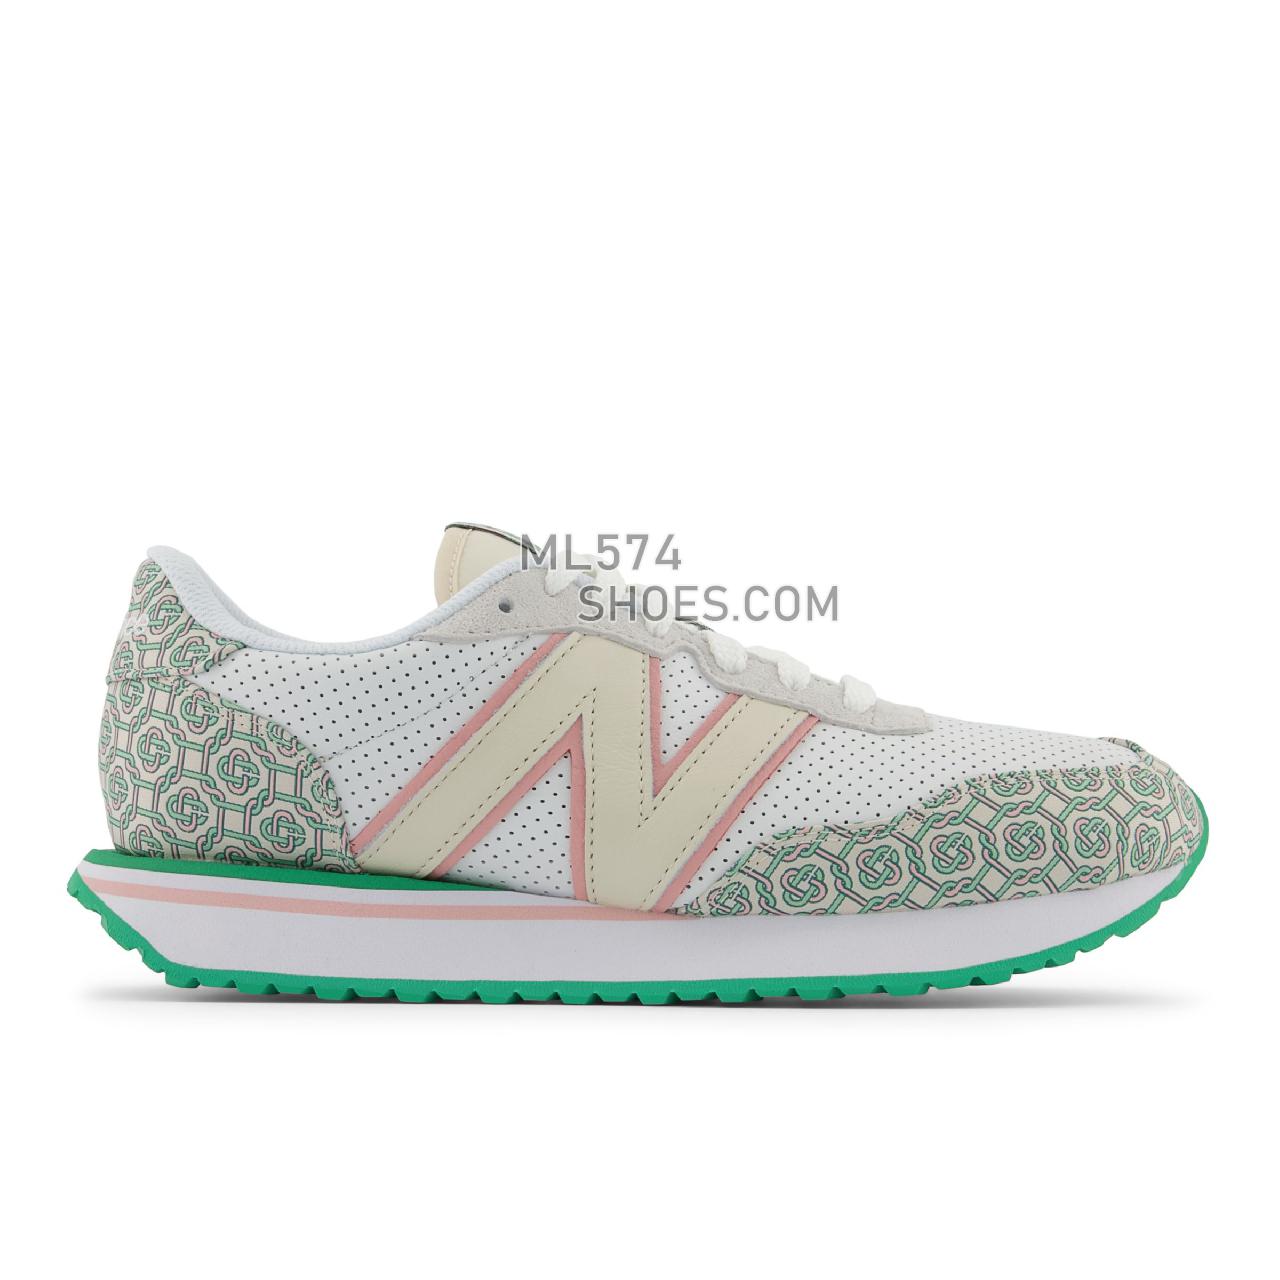 New Balance Casablanca 237 - Unisex Men's Women's Sport Style Sneakers - Nb White with Holly Green - MS237CBA